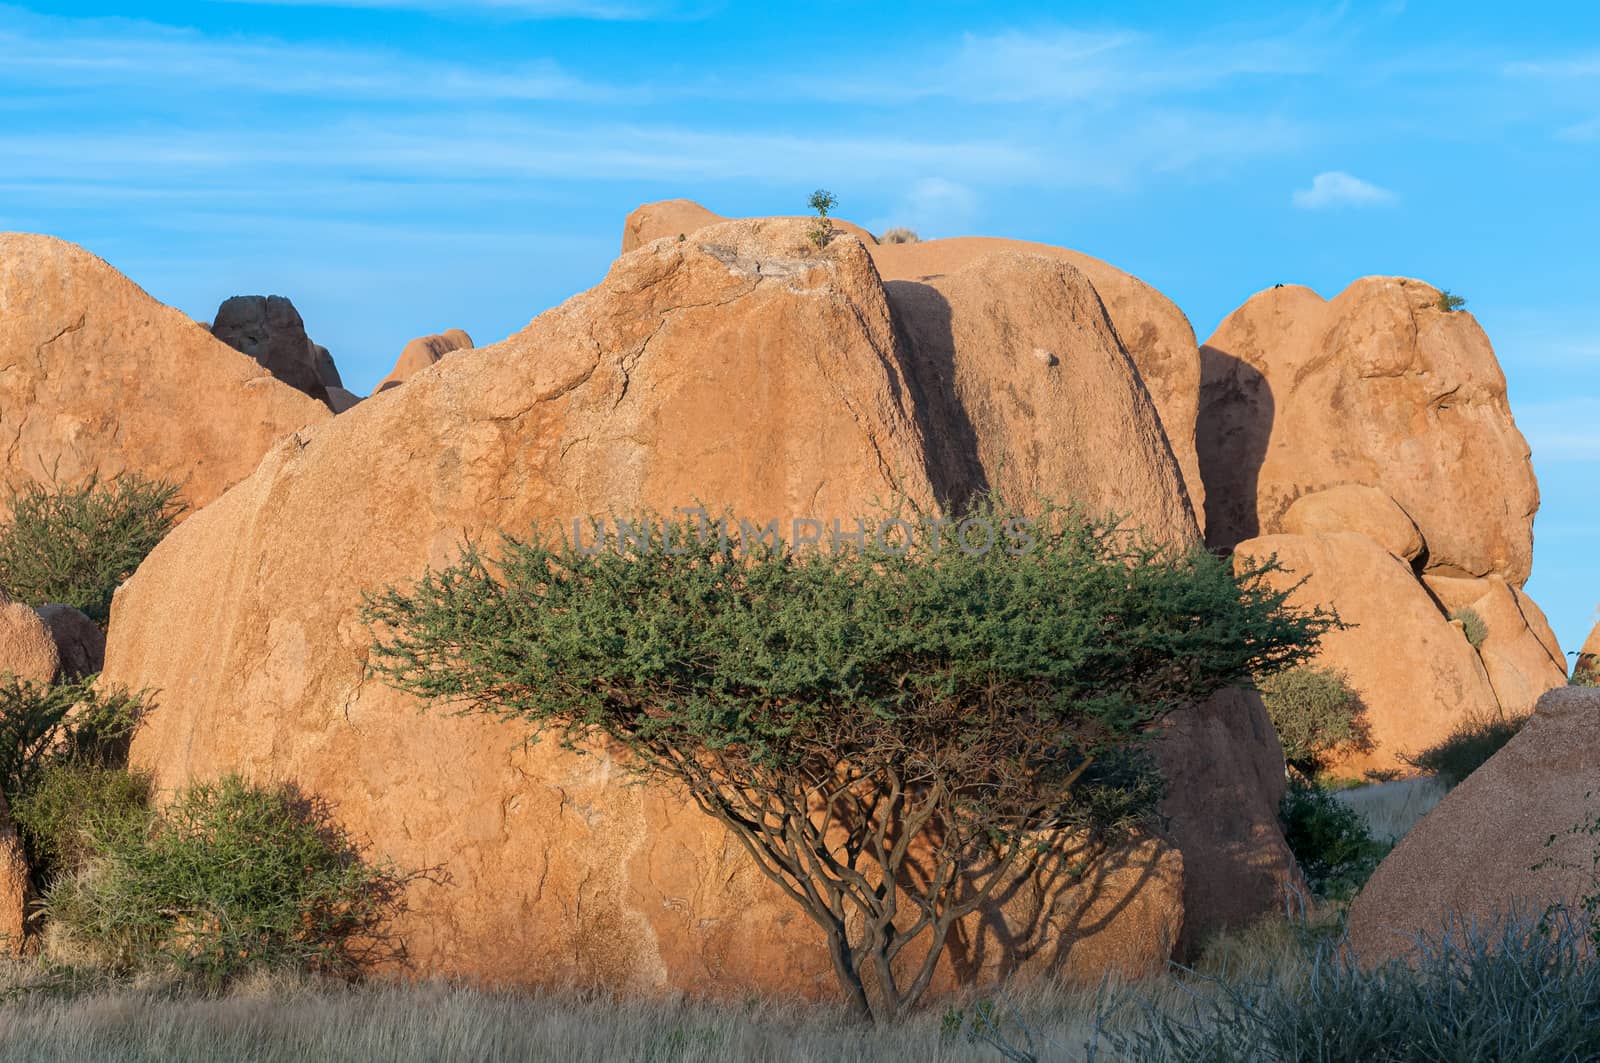 A view of granite boulders and a tree at the greater Spitzkoppe